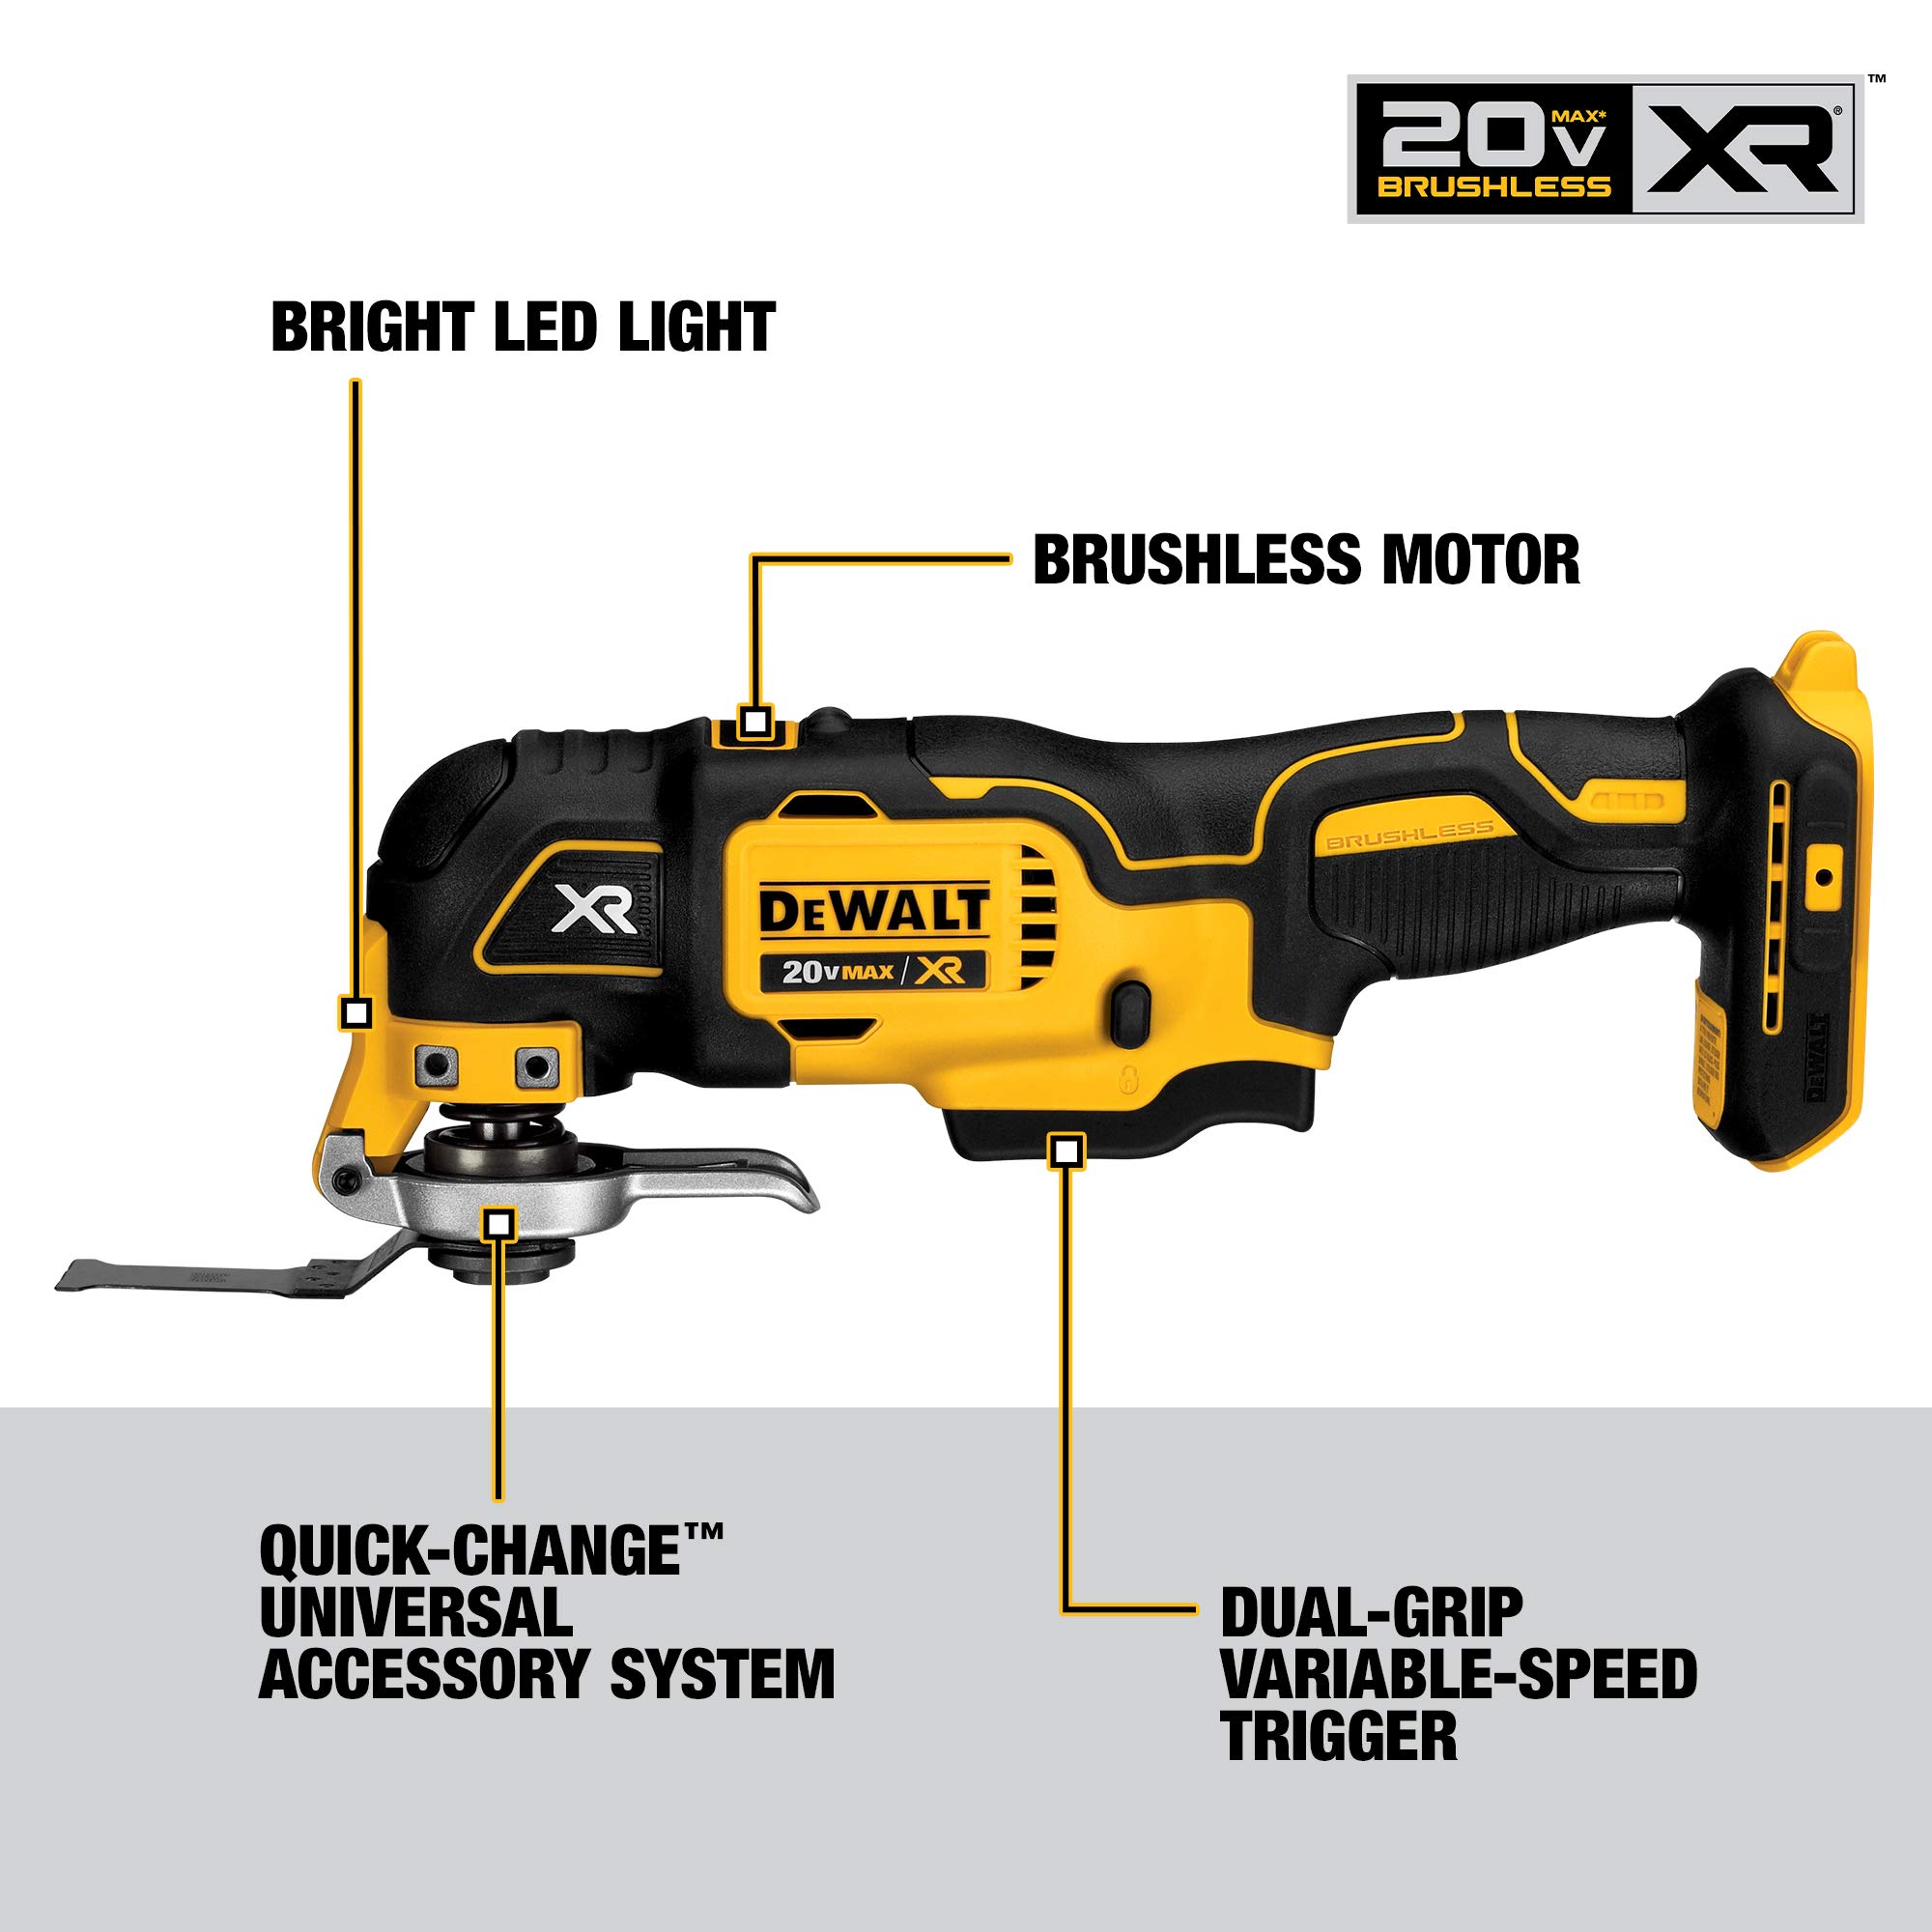 DEWALT 20V MAX Power Tool Combo Kit, 10-Tool Cordless Power Tool Set with 2 Batteries and Charger (DCK1020D2)